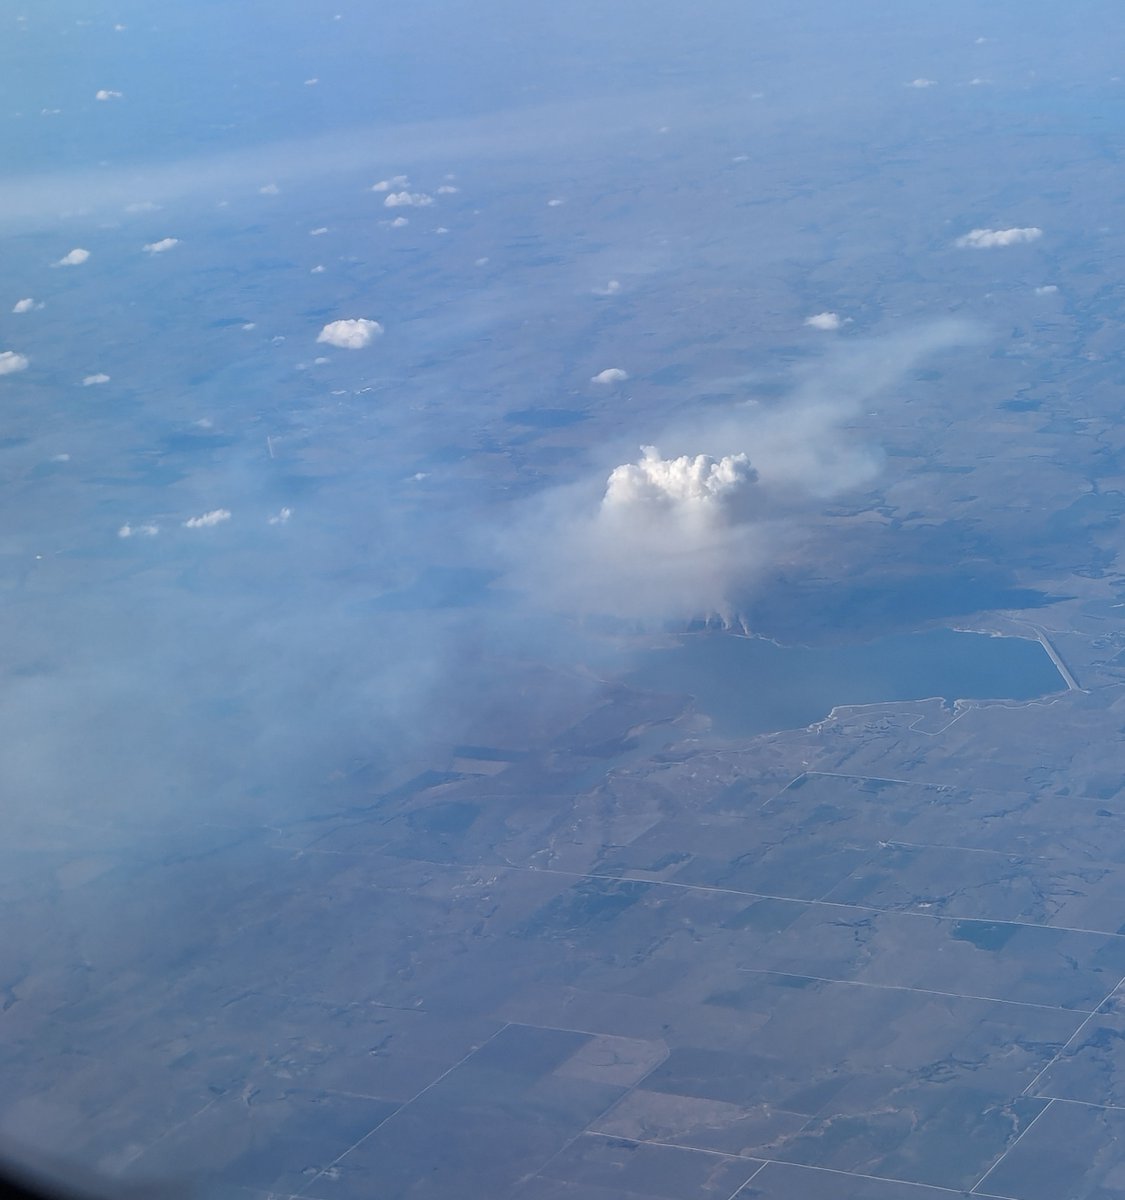 Have you ever wondered what a #rxfire looks like from 36,000 feet? Now you know...

This photo was captured from 36,000 feet above ground of a #rxburn at Kirwin NWR in KS. Notice how you can see different units burning & the way smoke disperses in the sky

📸 Andrew Bailey/USFWS